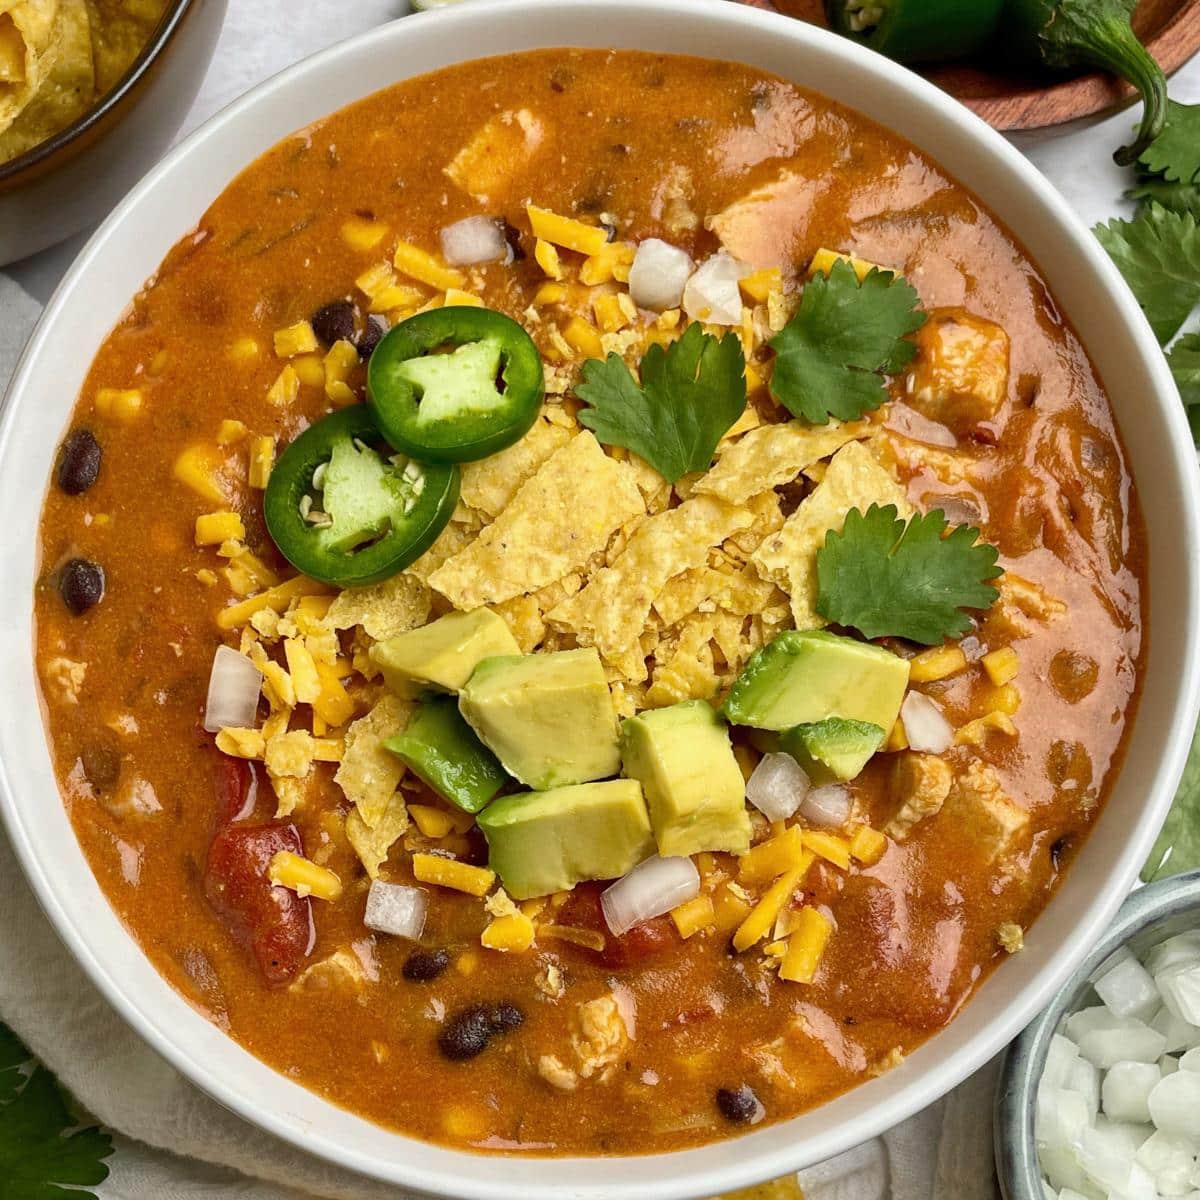 A bowl of vegan enchilada soup with toppings.